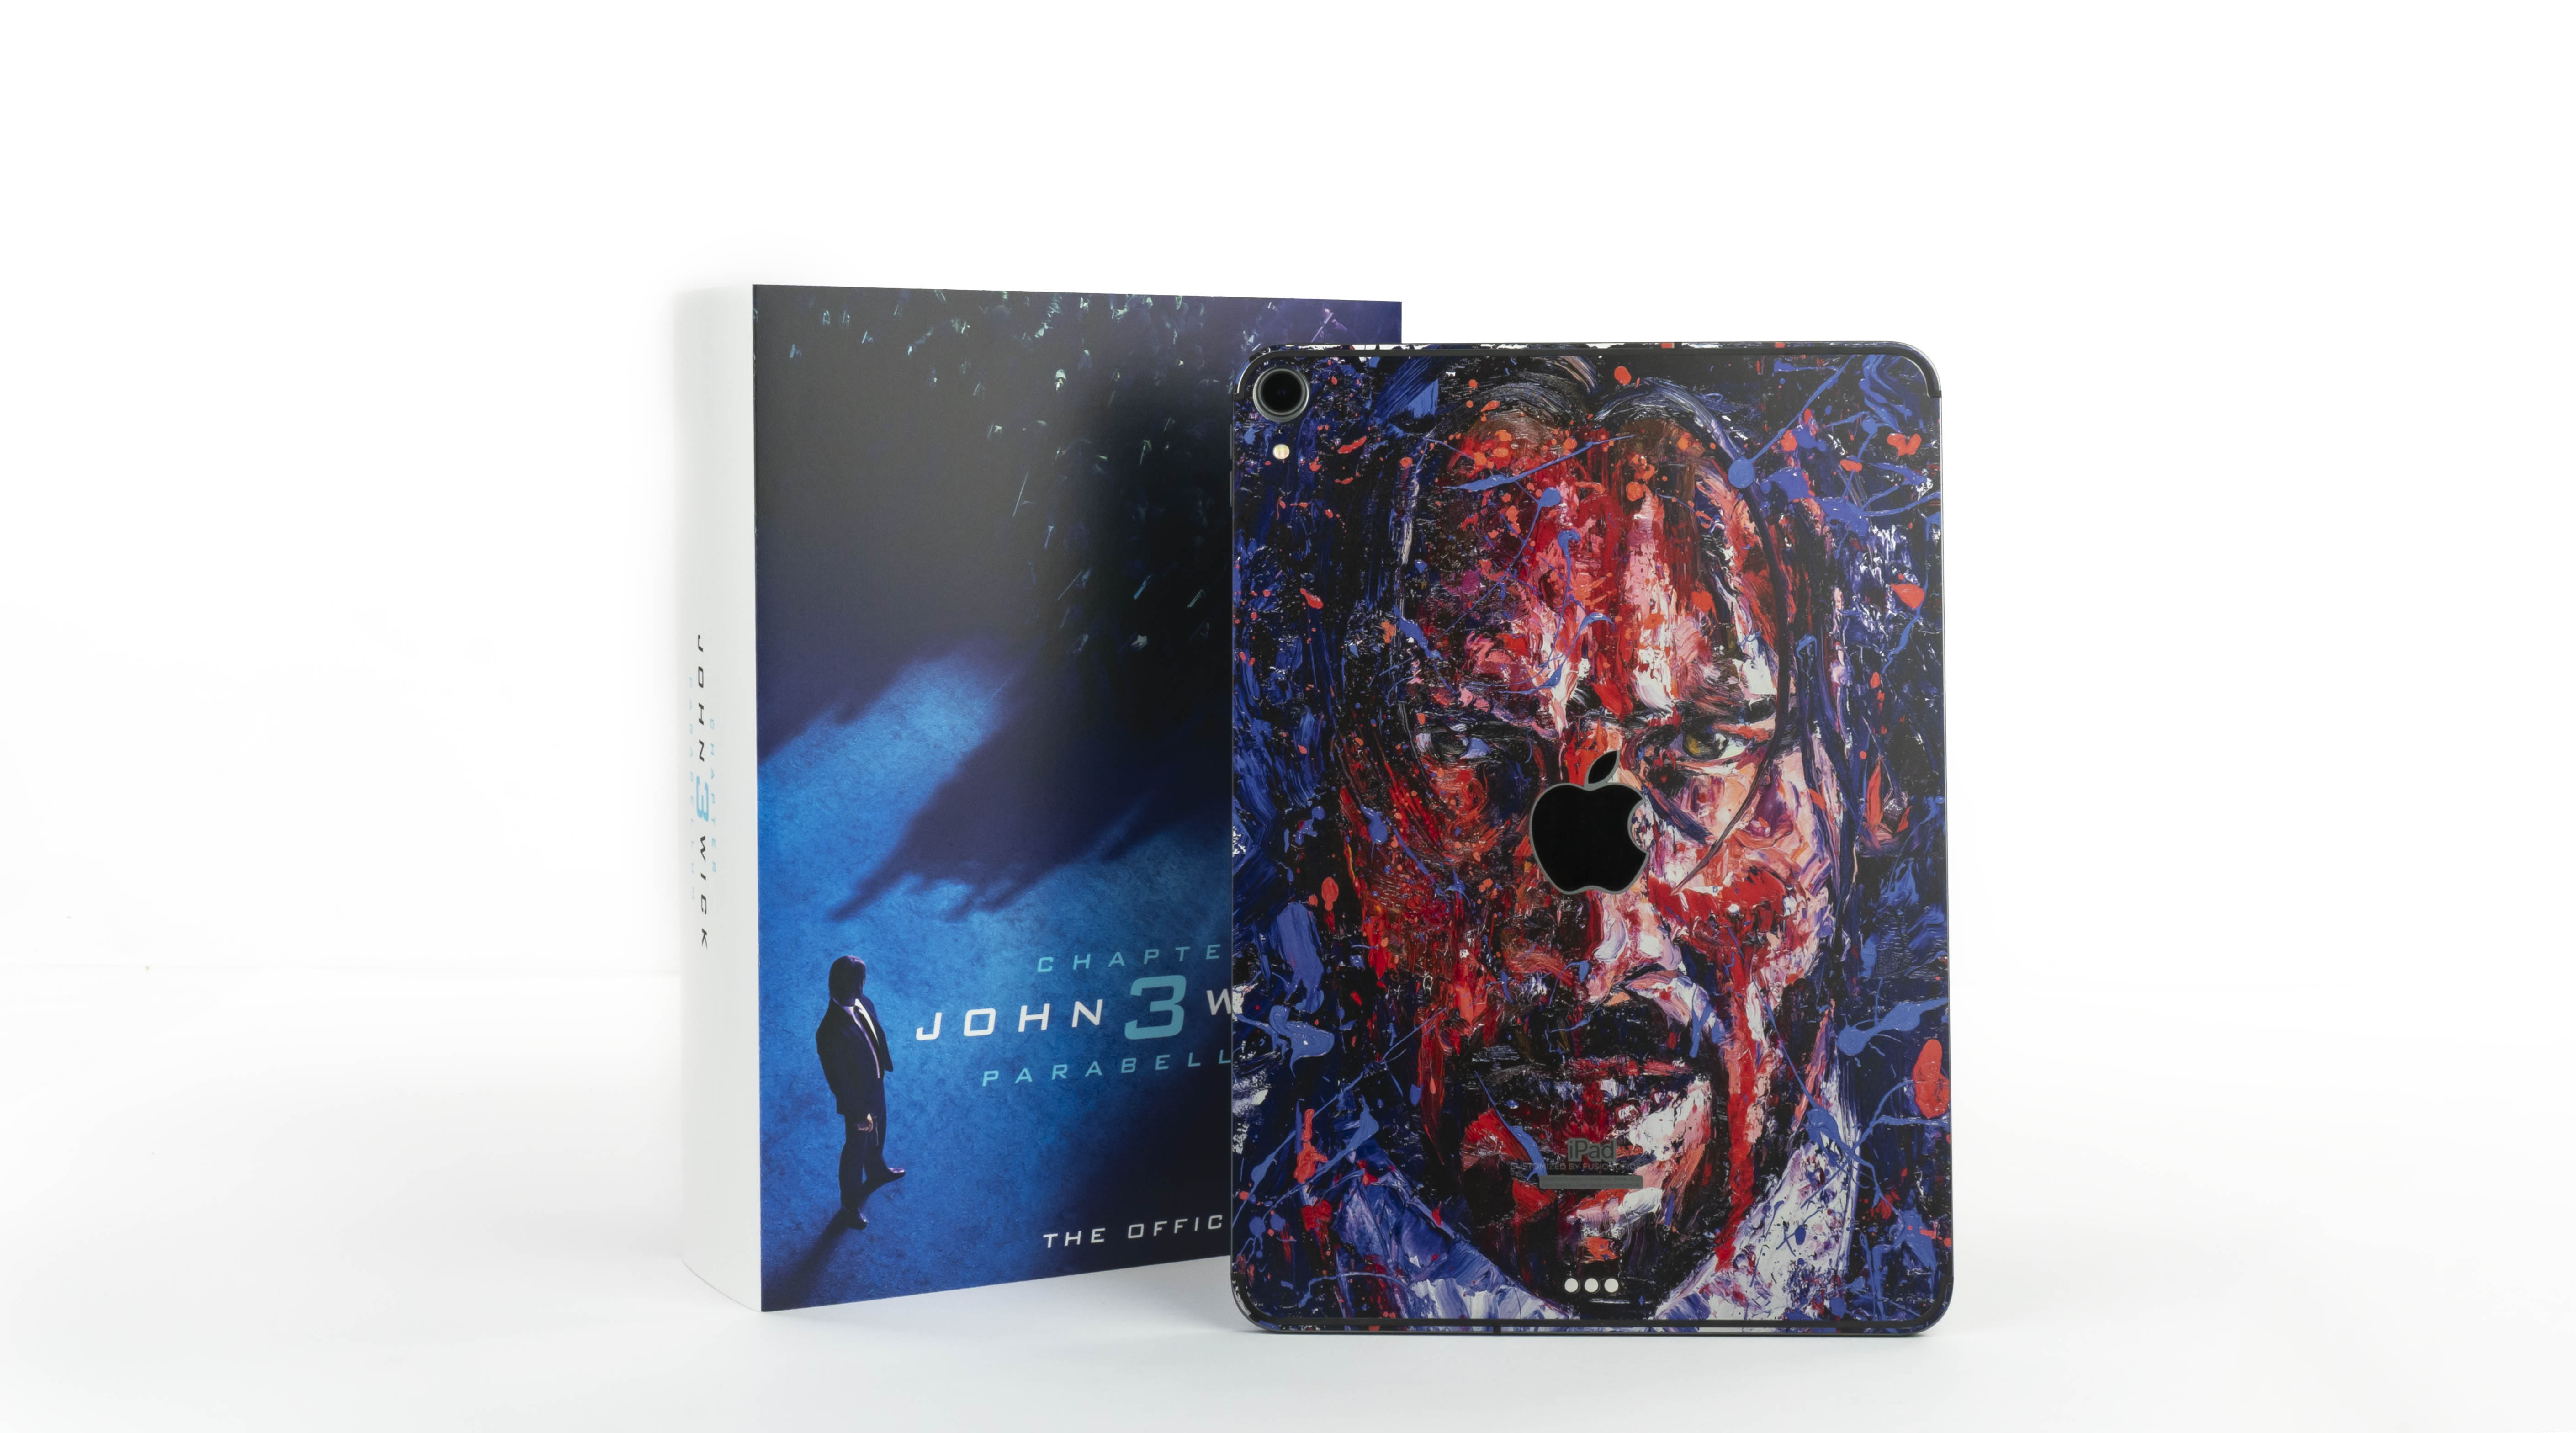 Highly visual artwork from the movie is printed on the back of each iPad Pro. Inside the tablet is a designated app featuring the film’s images and videos.